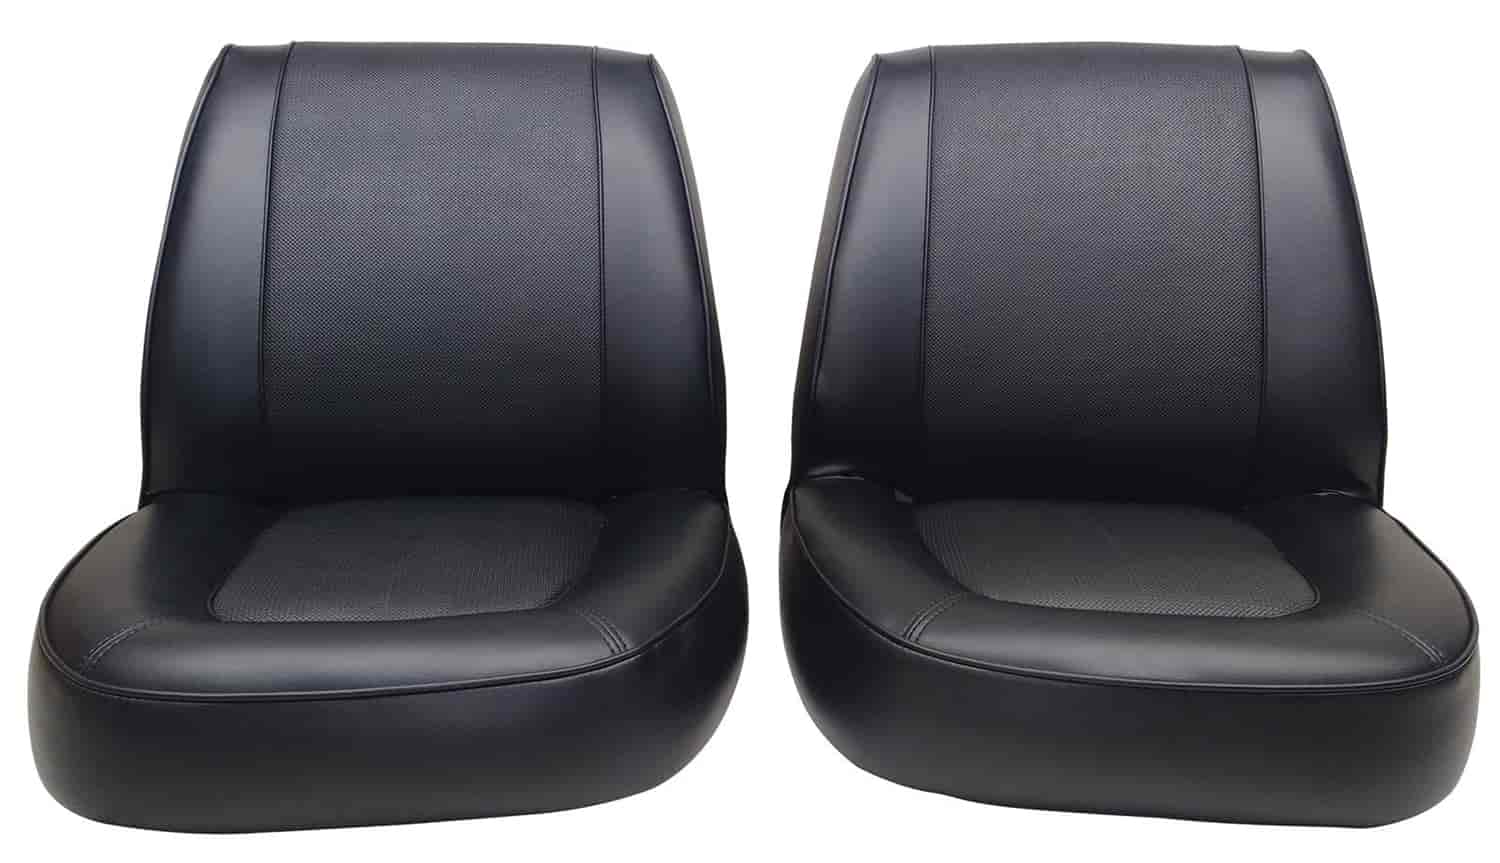 1965 Ford Falcon Futura Convertible Interior Front Bucket Seat Upholstery Set